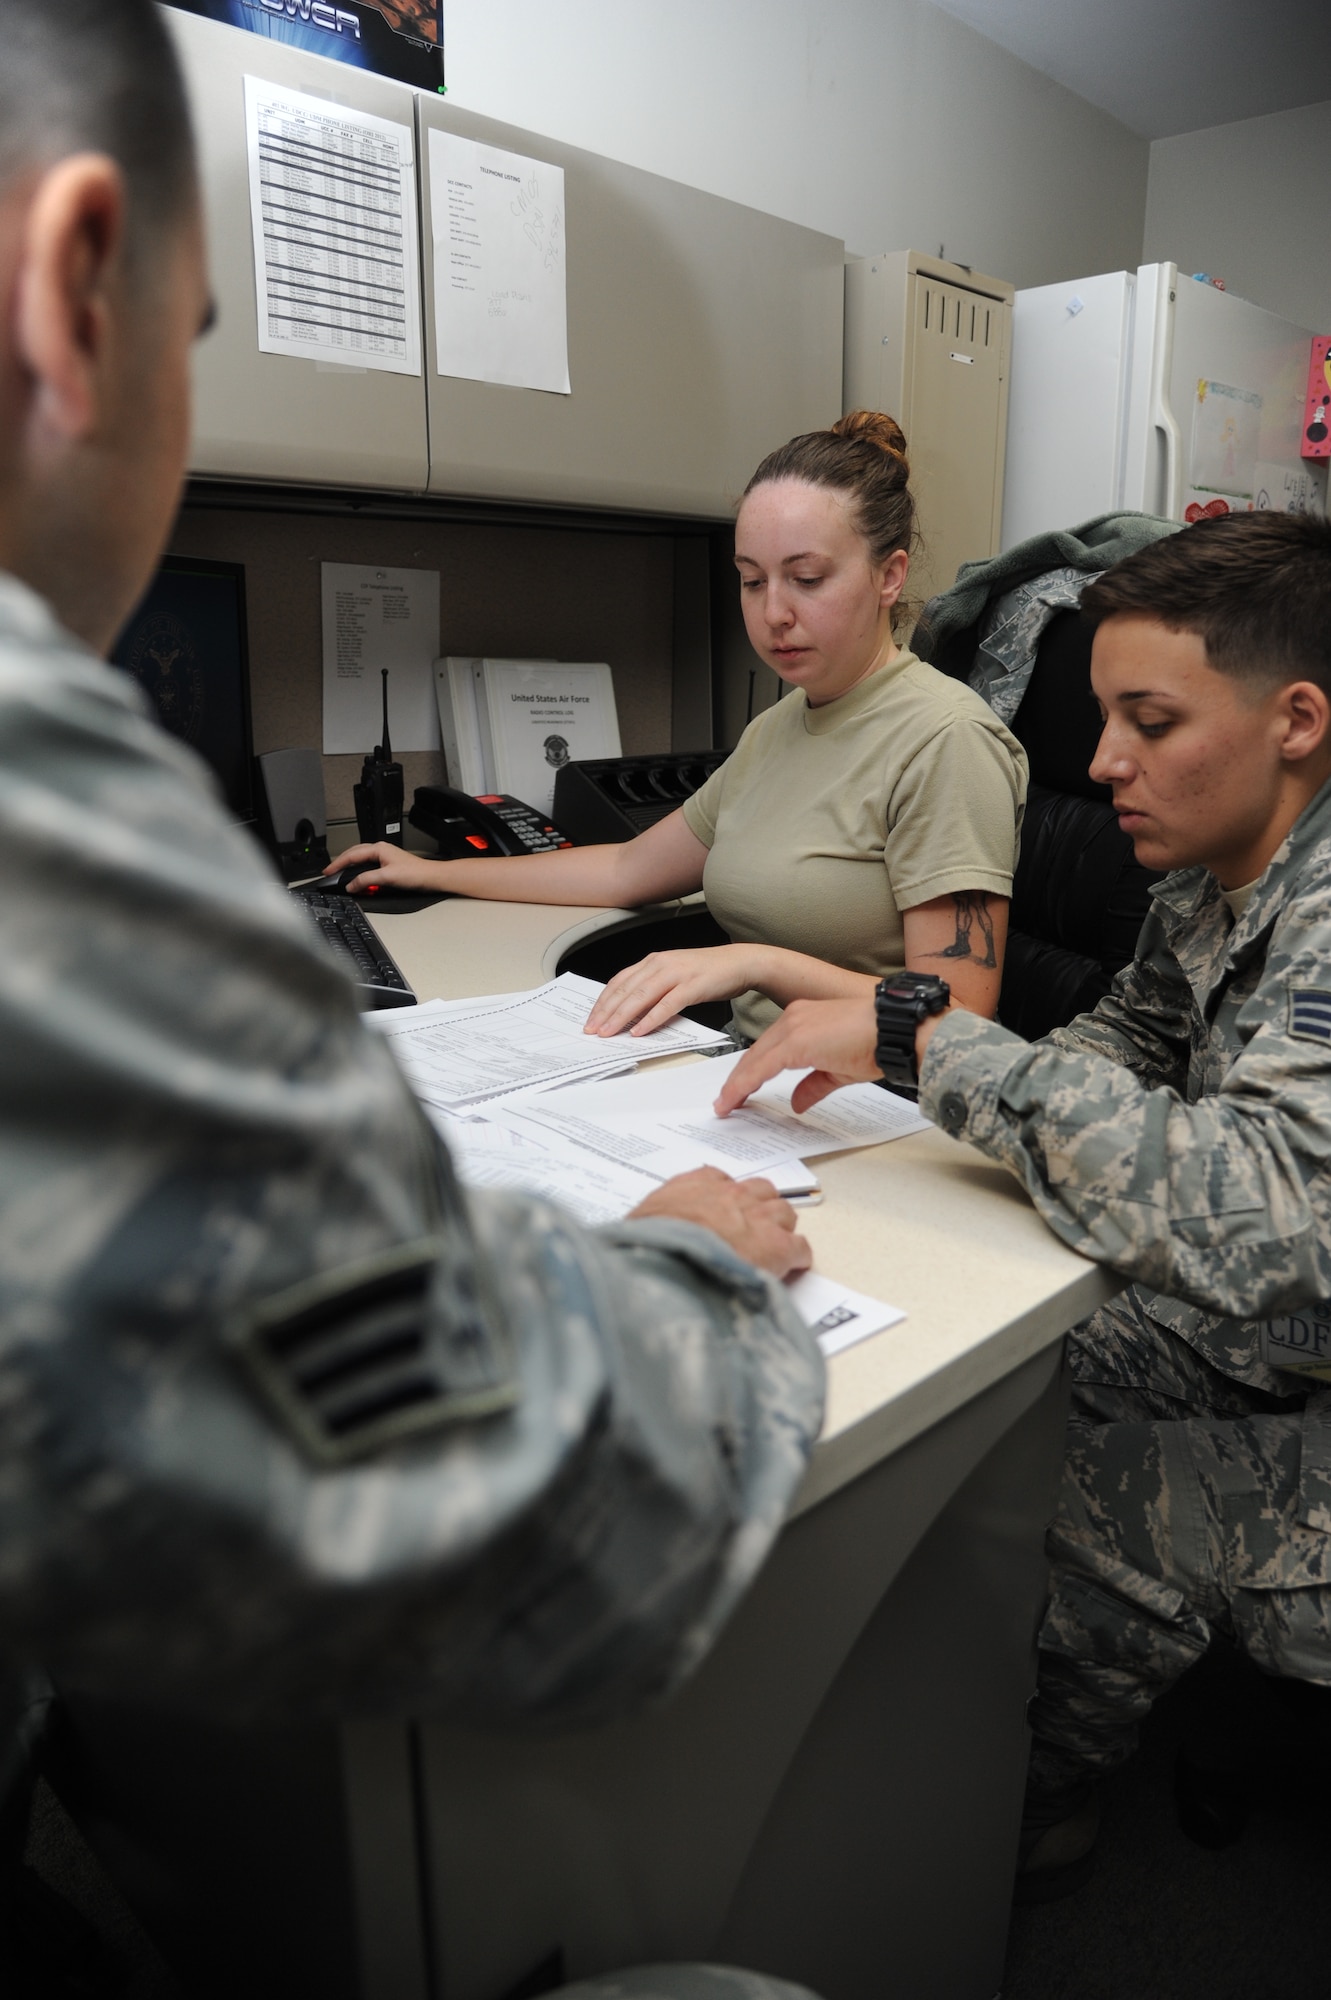 Senior Airman Christopher Emond, Staff Sgt. Ann Yarbrough and Senior Airman Anna Martin, 81st Logistics Readiness Squadron, check shipment information into the cargo movement operations system at the supply warehouse during a humanitarian deployment exercise Oct. 15, 2014, at the Taylor Logistics Center, Keesler Air Force Base, Miss.  The exercise scenario tested the mission readiness of Team Keesler members for world-wide deployments. (U.S. Air Force photo by Kemberly Groue)